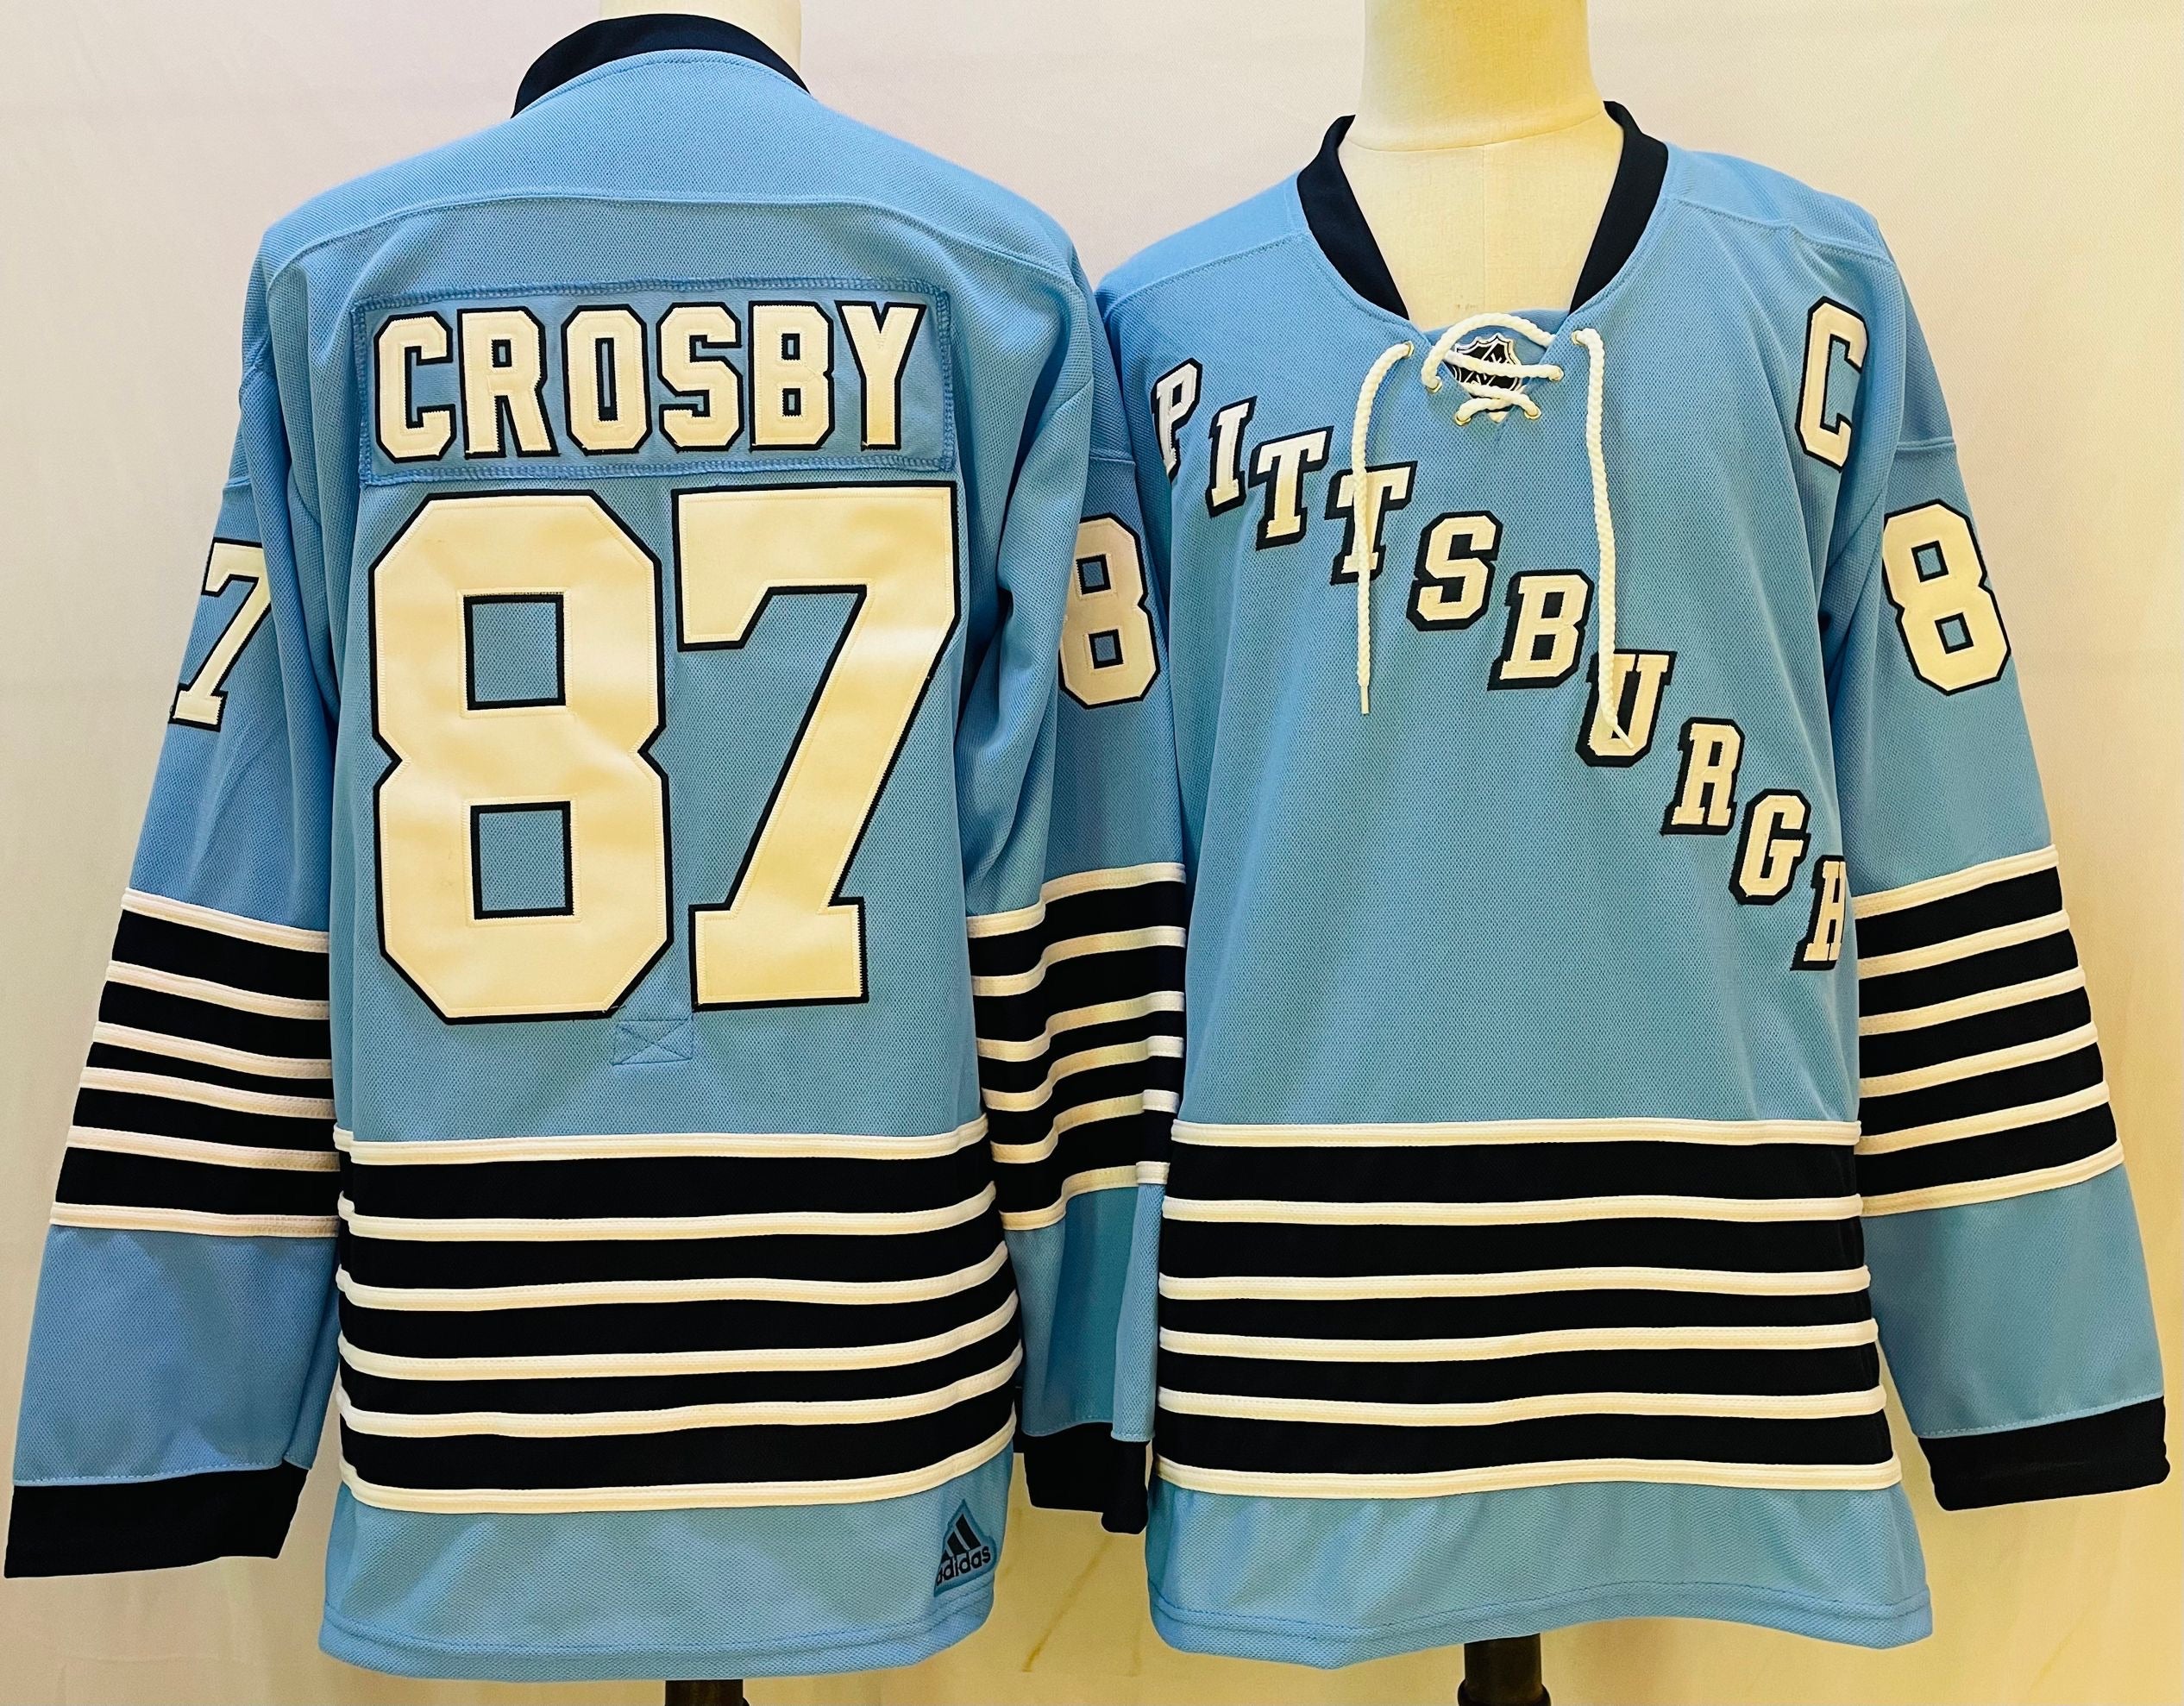 Pittsburgh Penguins Signed Jerseys, Collectible Penguins Jerseys